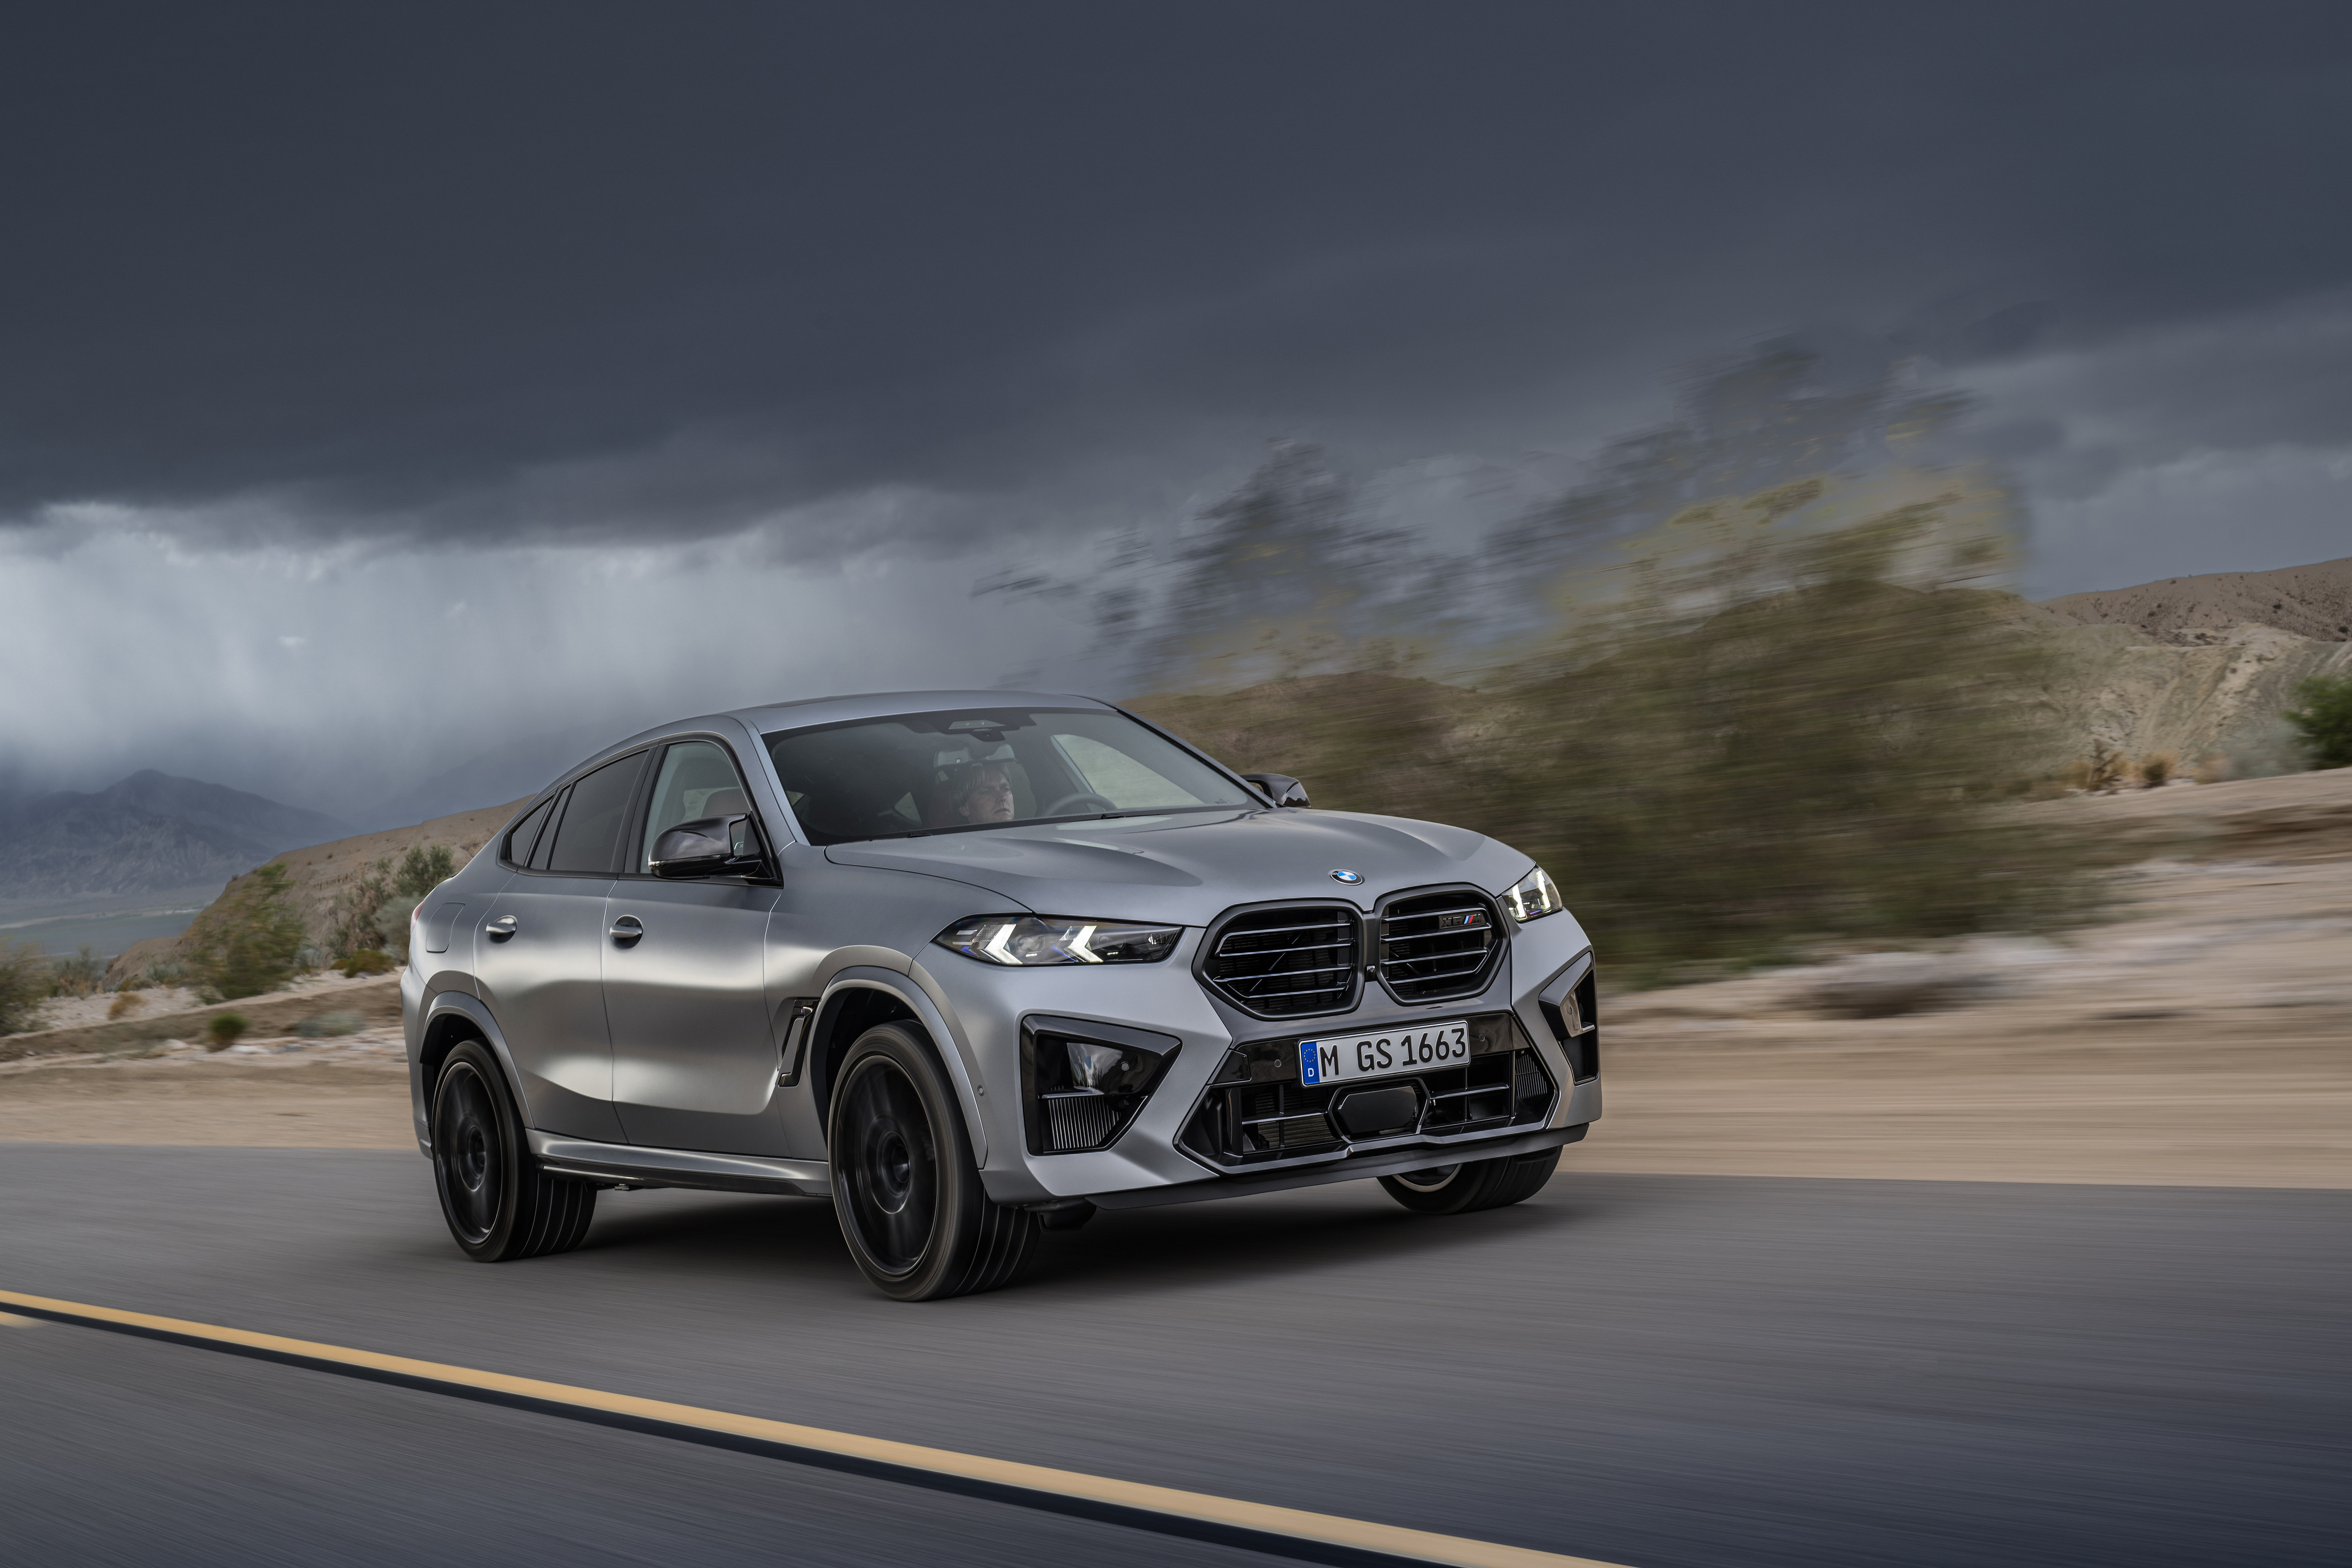 2020 BMW X6 M Review, Pricing, and Specs